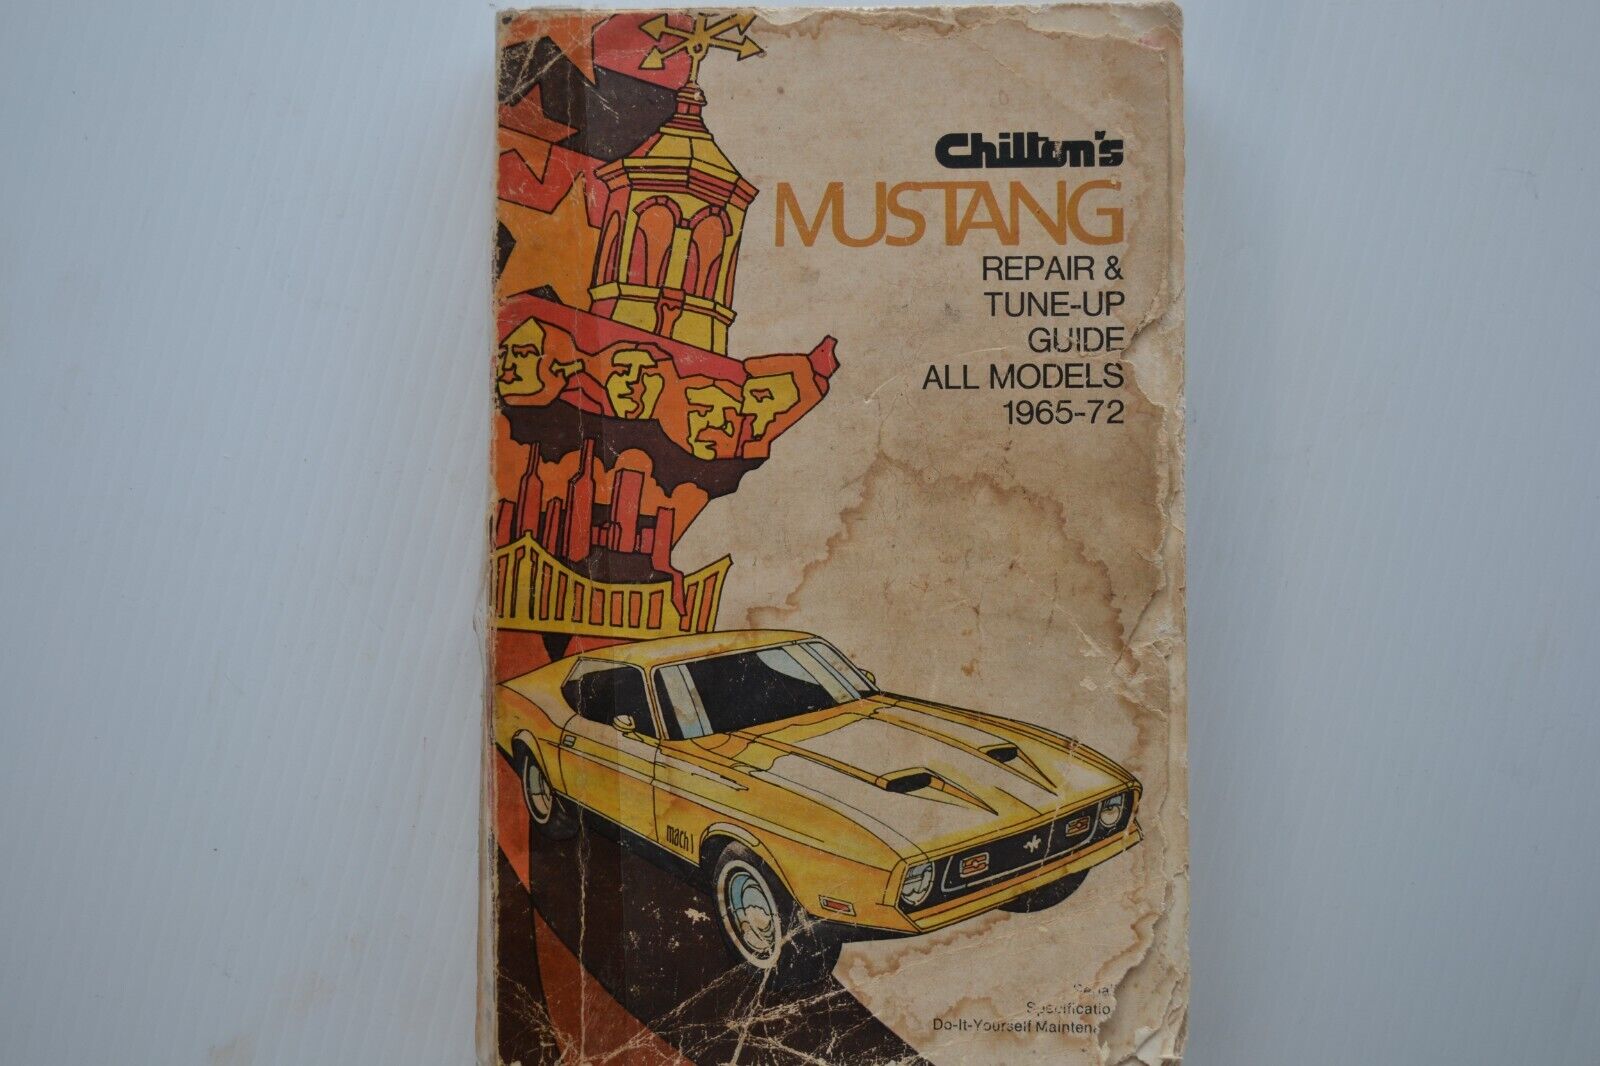 Chilton\'s Mustang Repair and Tune up Guide All Models 1965-1972